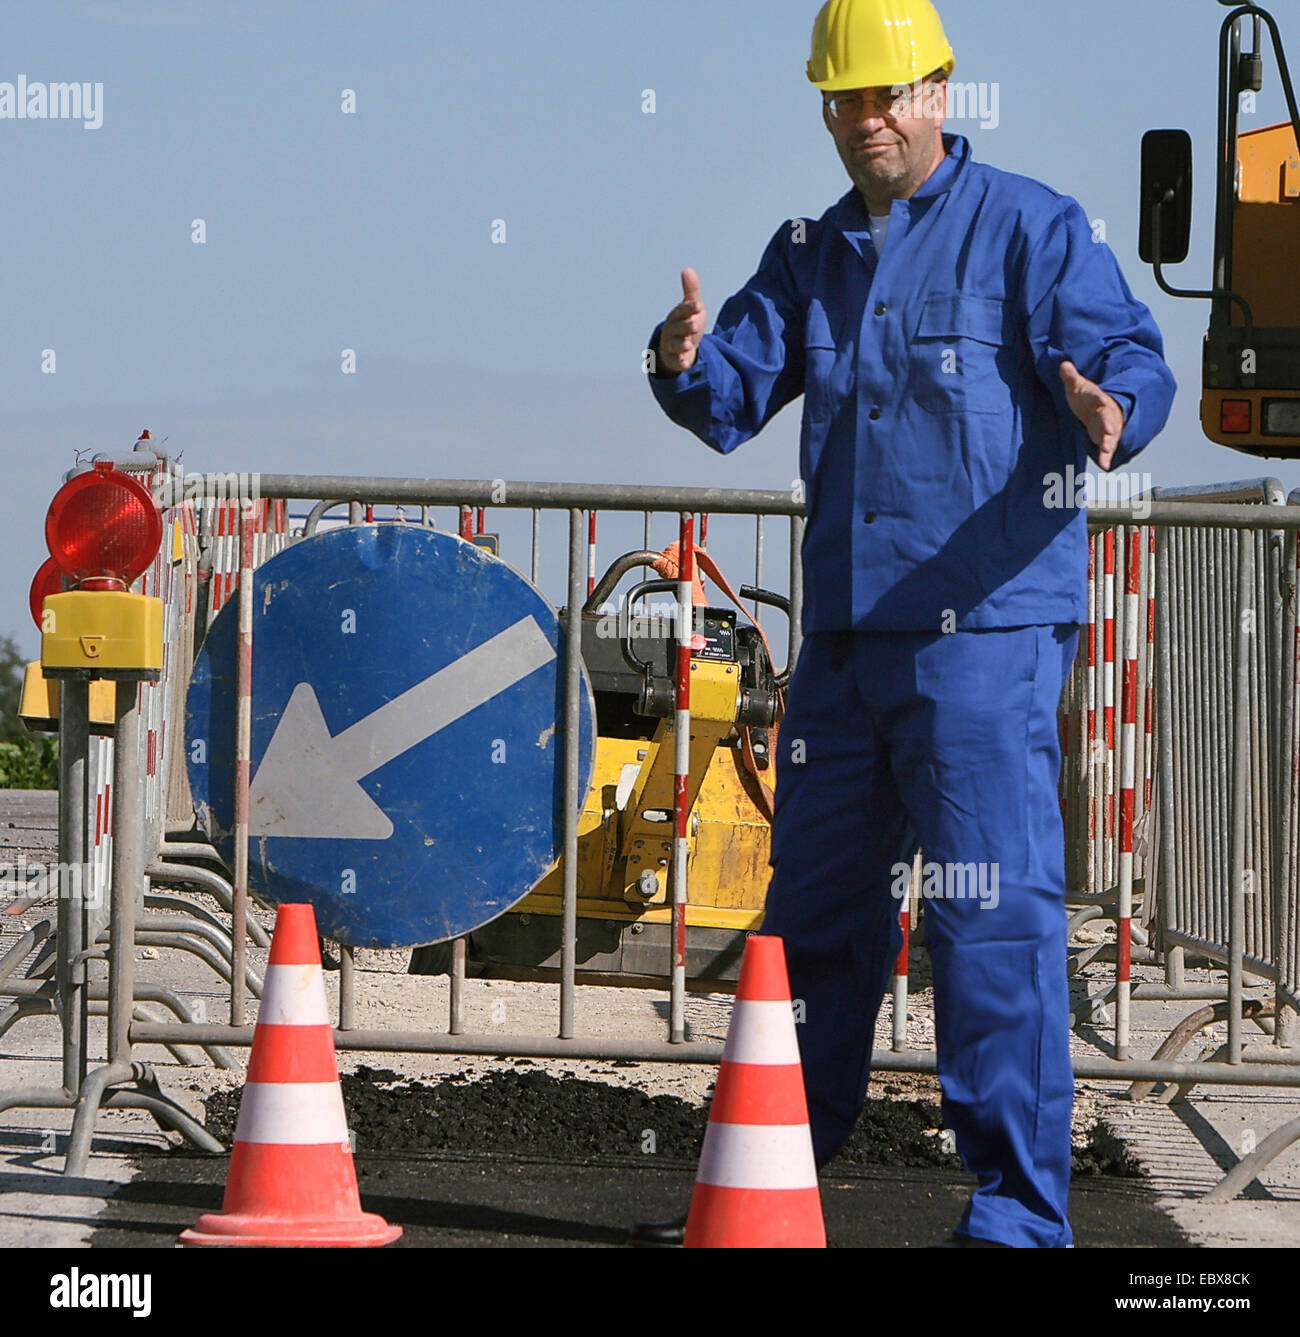 construction worker puts up streetbuilding Stock Photo